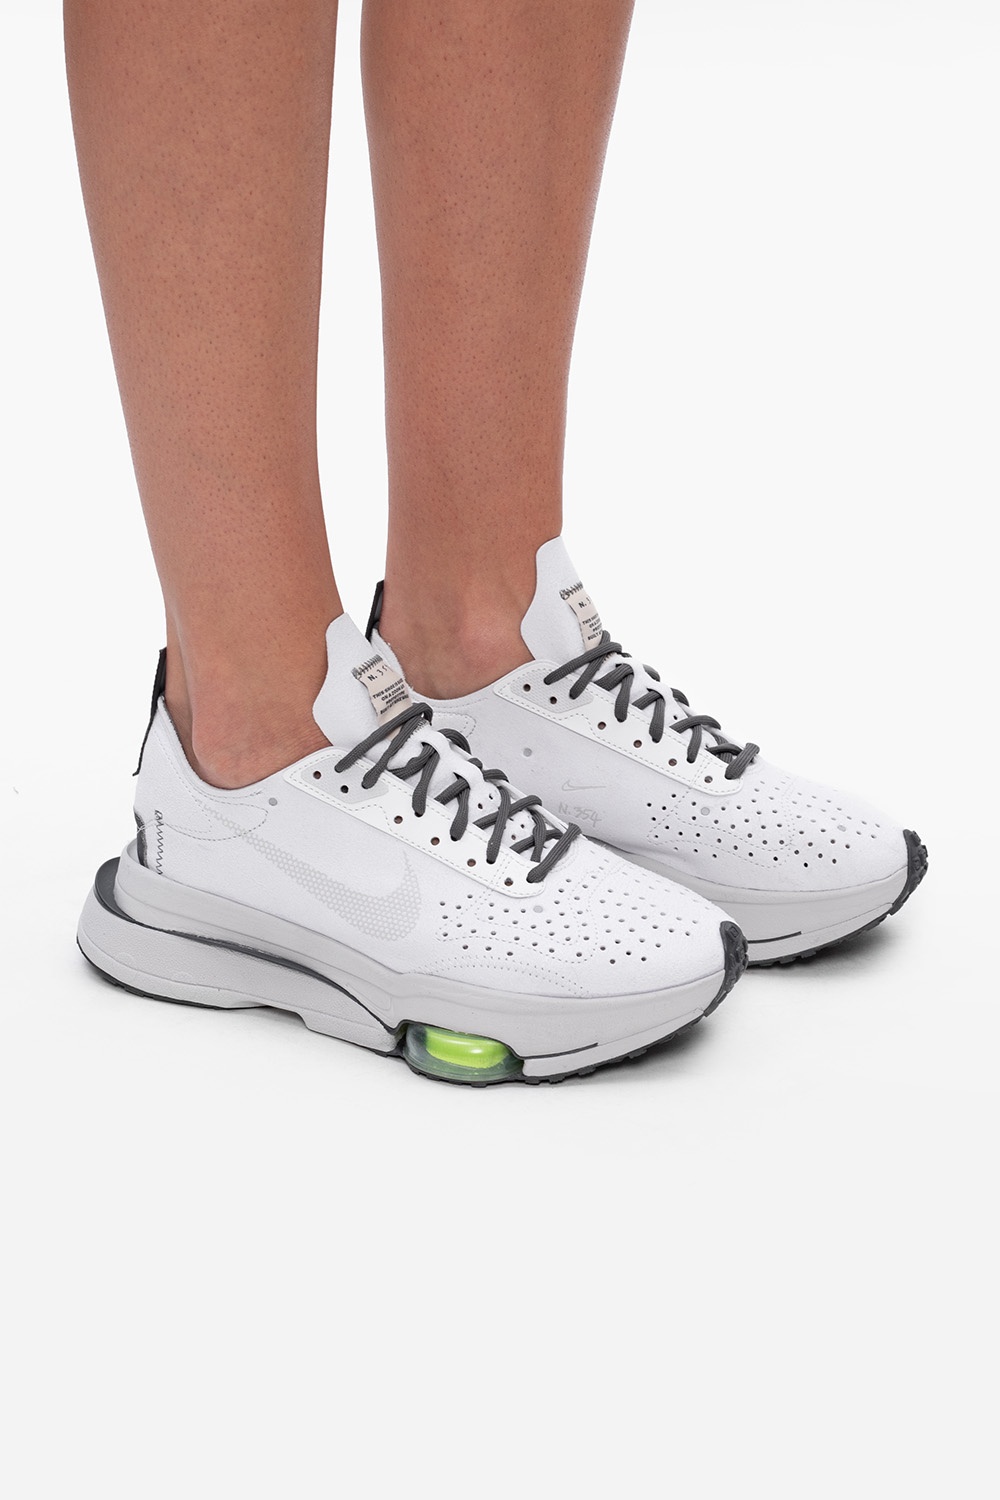 nike women's air zoom type shoes